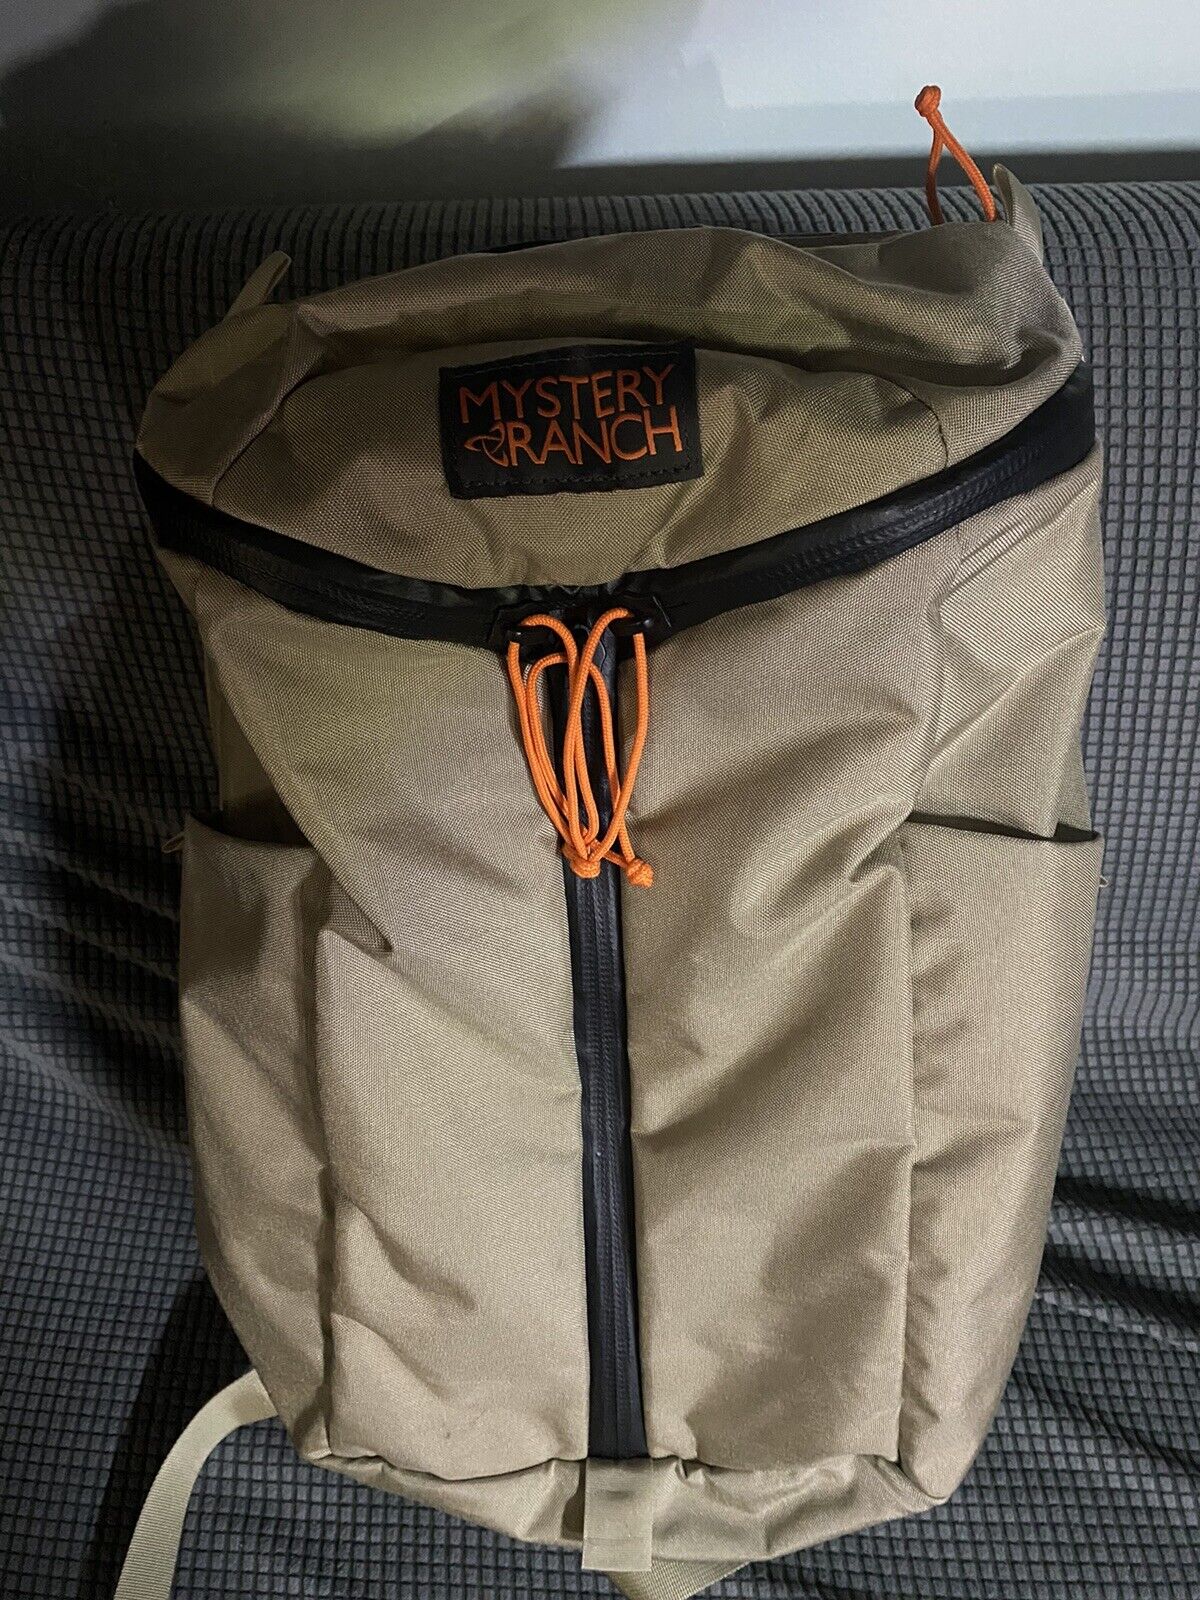 Mystery Ranch 24L Urban Assault Backpack EDC -DISCONTINUED